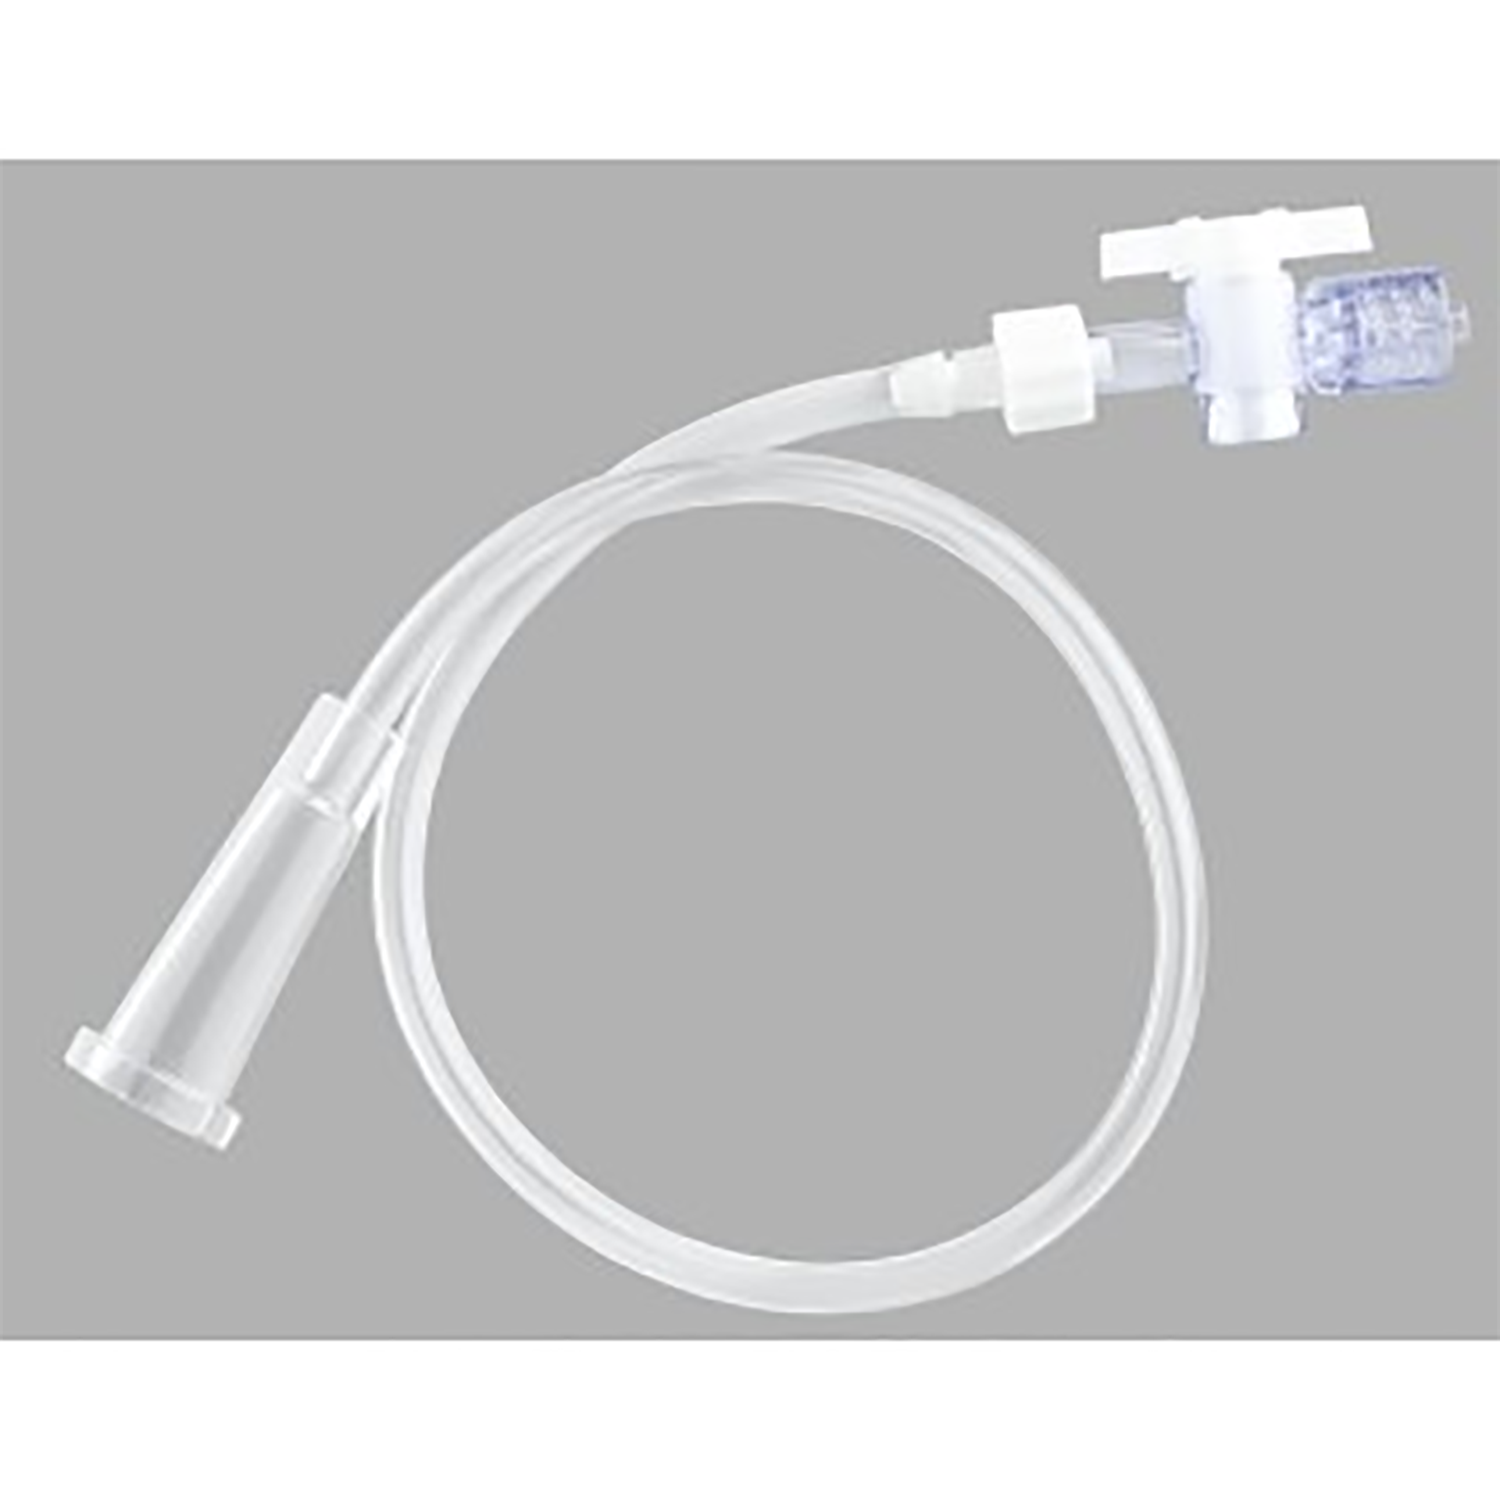 Drainage Bag Connector Connecting Tube | Single (1)